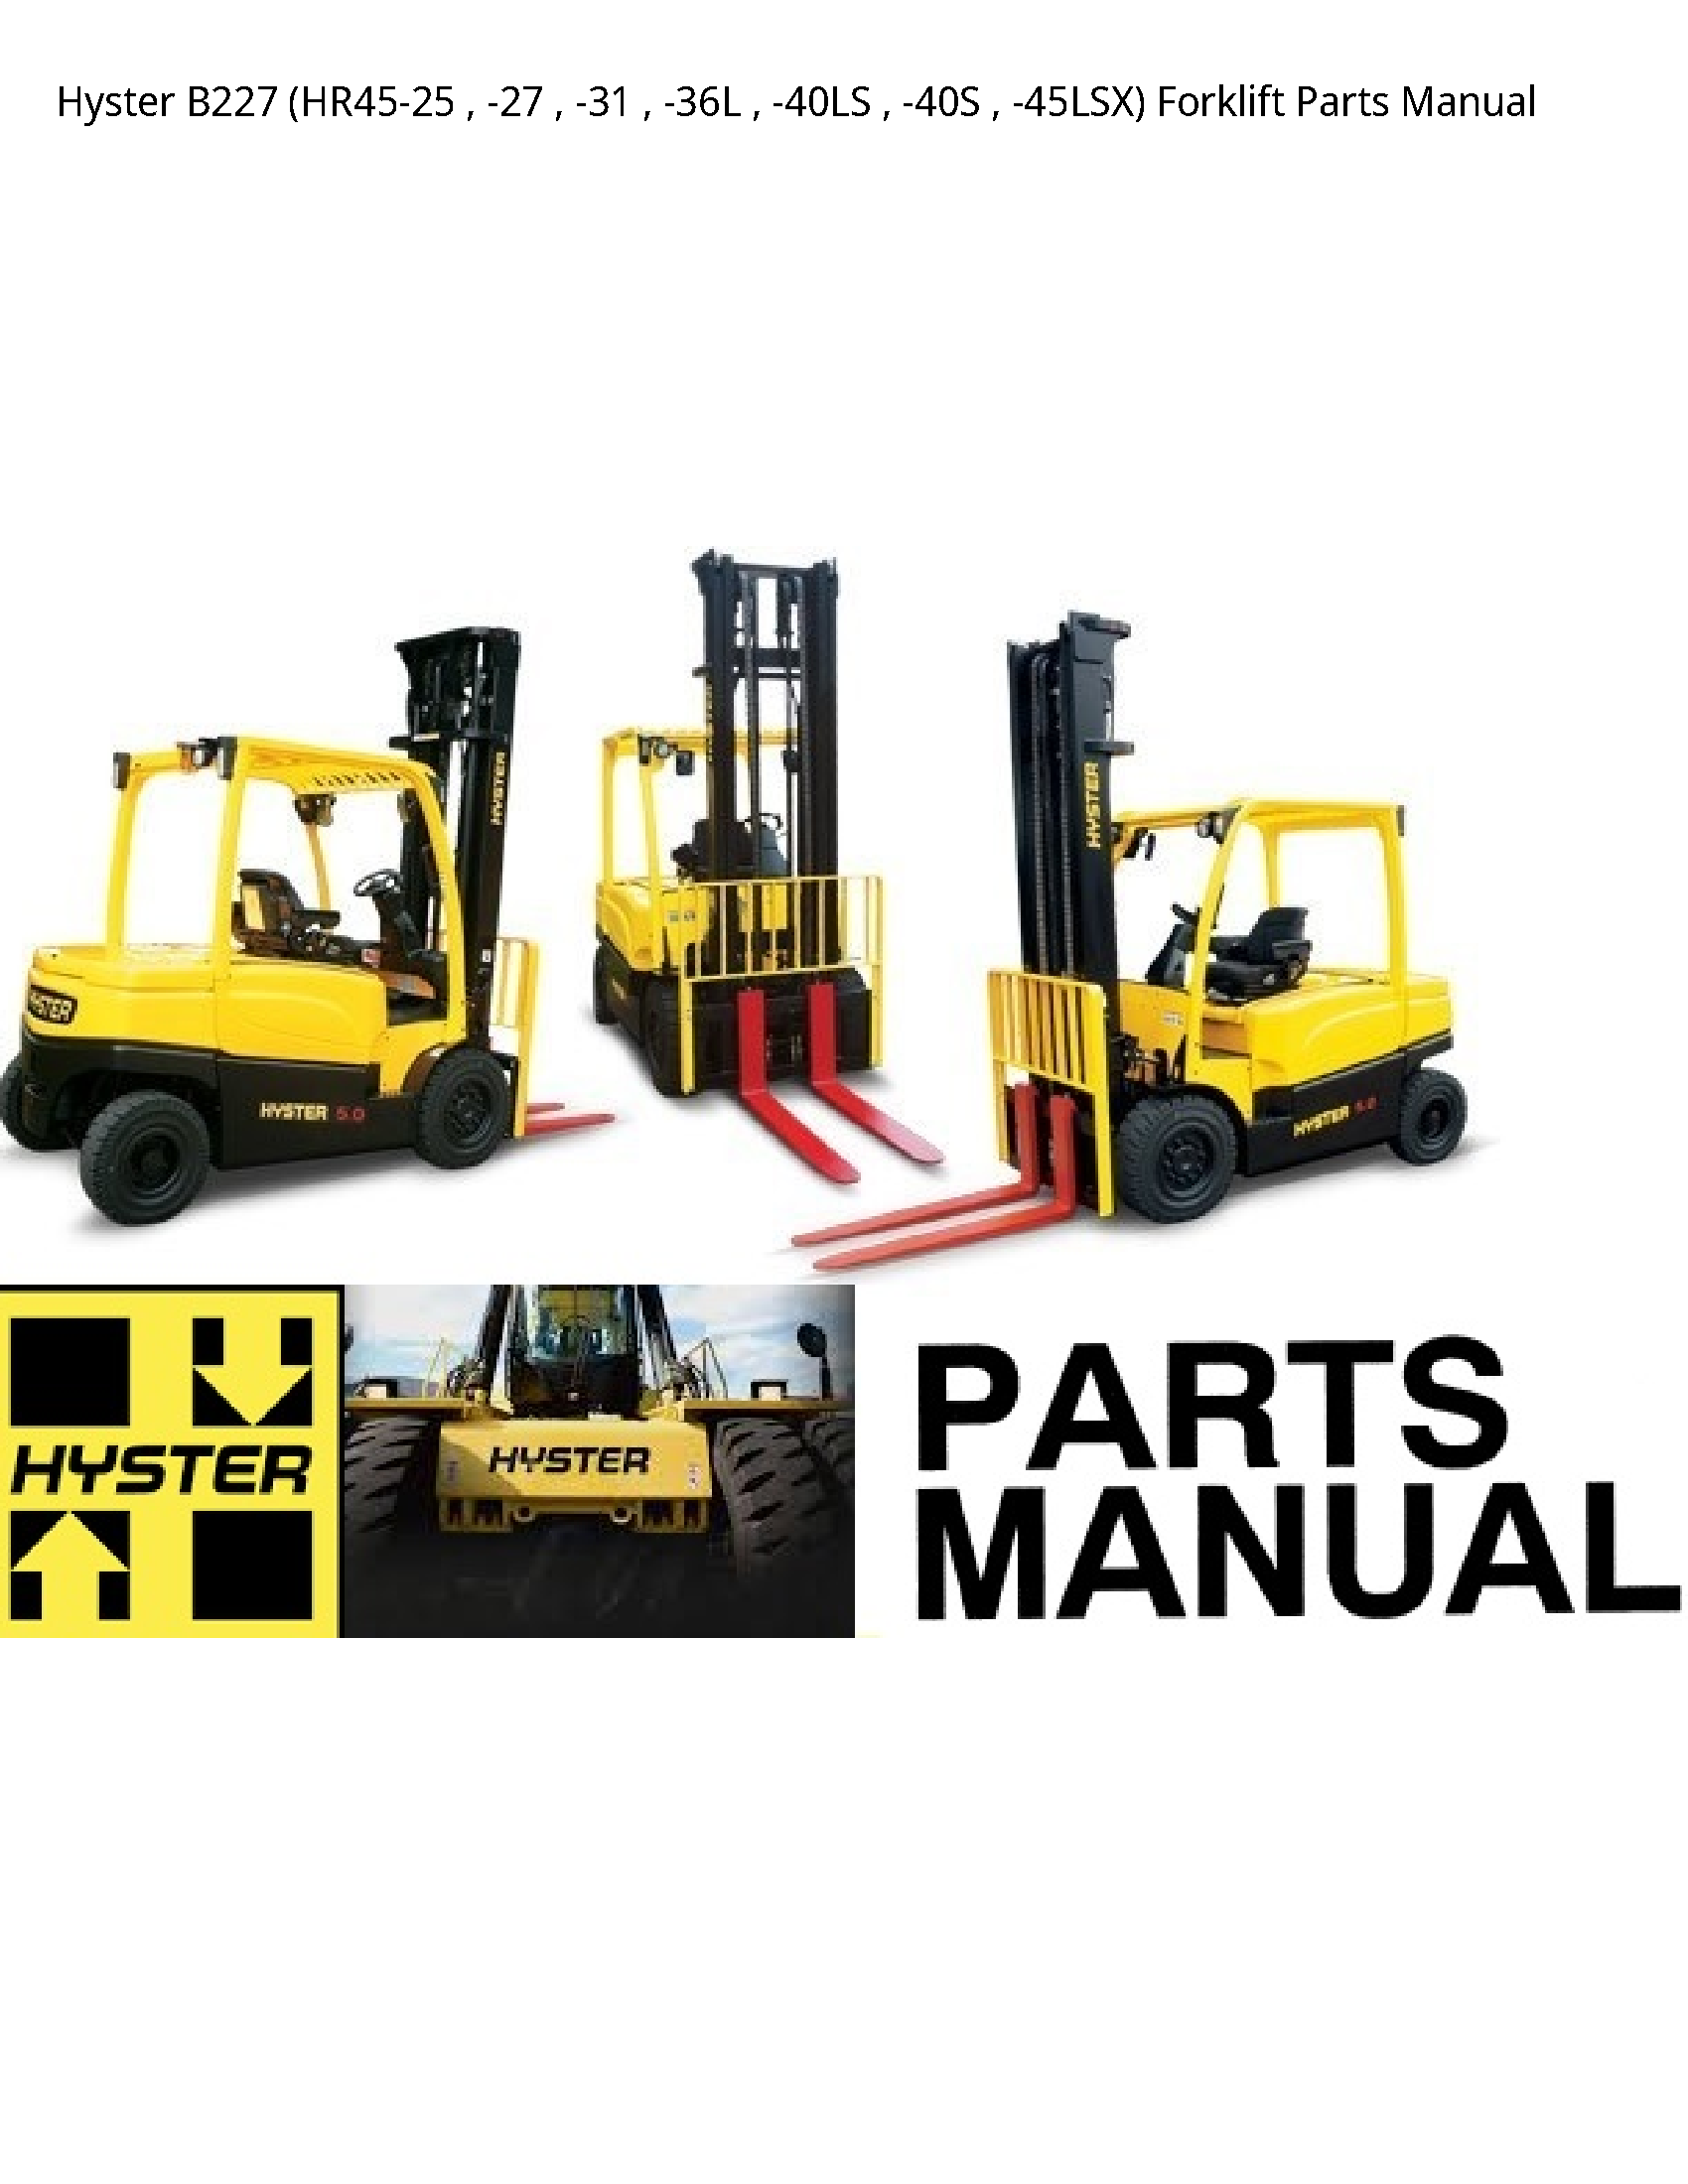 Hyster B227 Forklift Parts manual